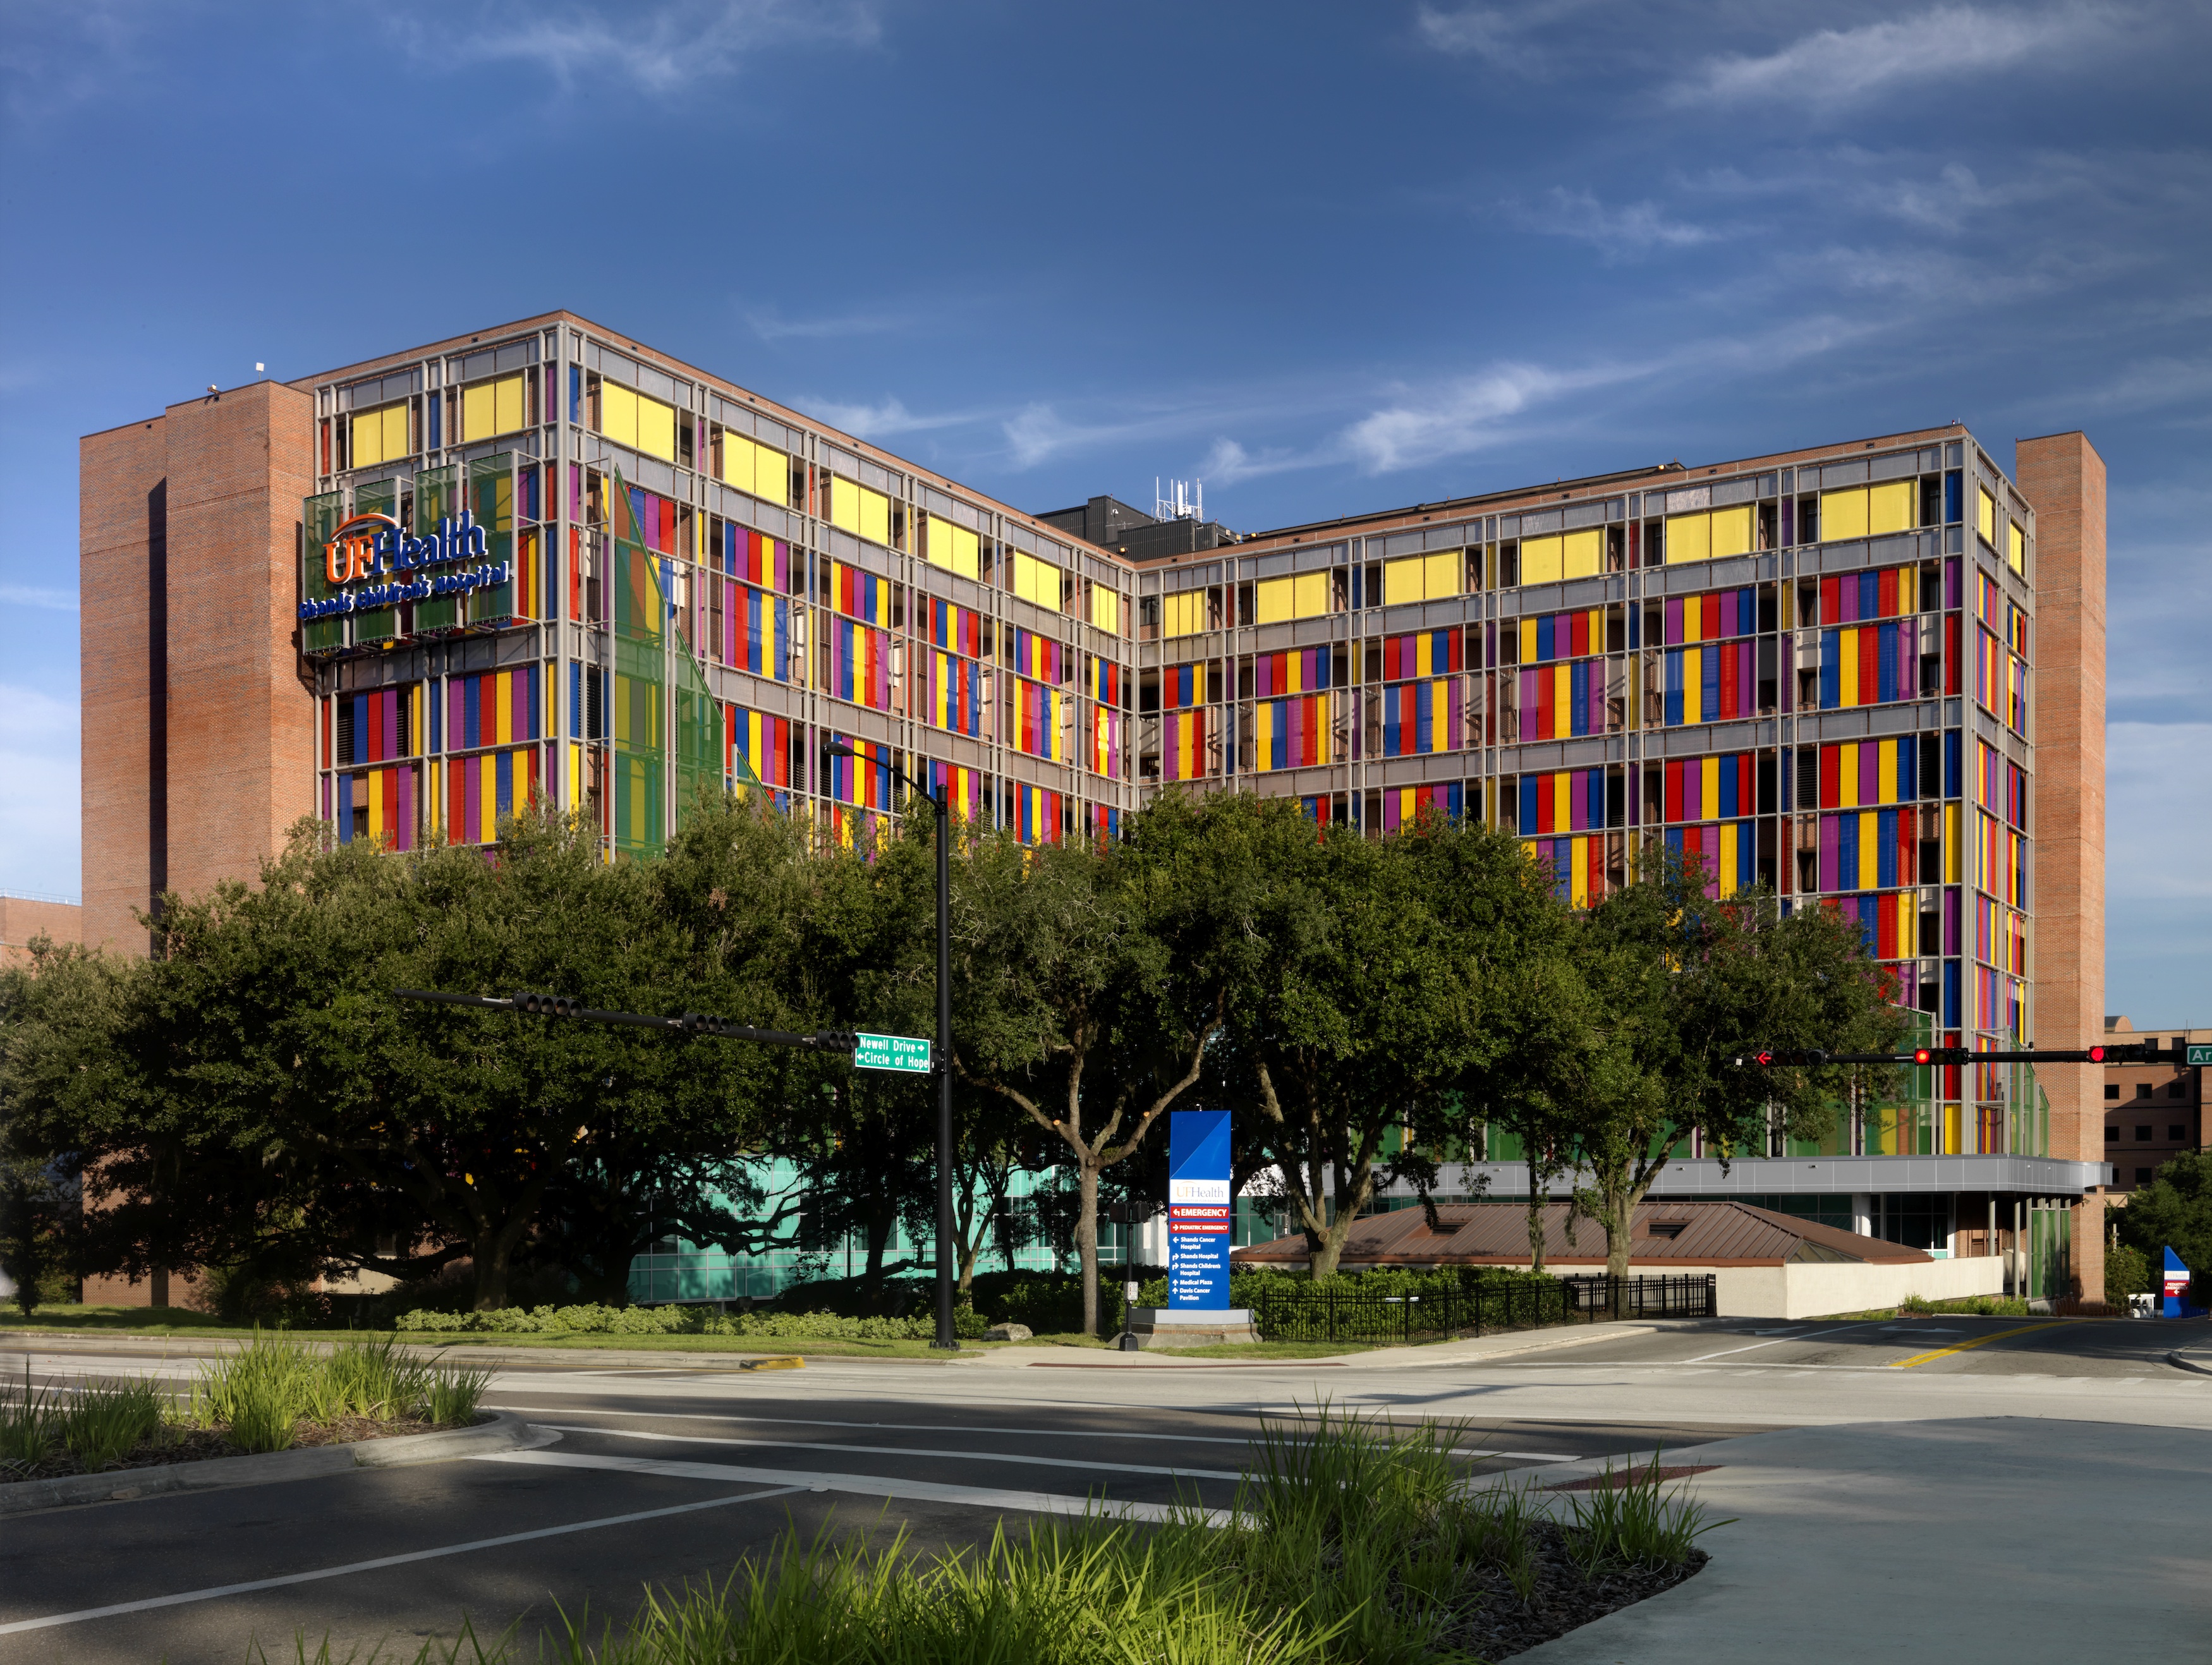 Images of Childrens Hospital | 3500x2635